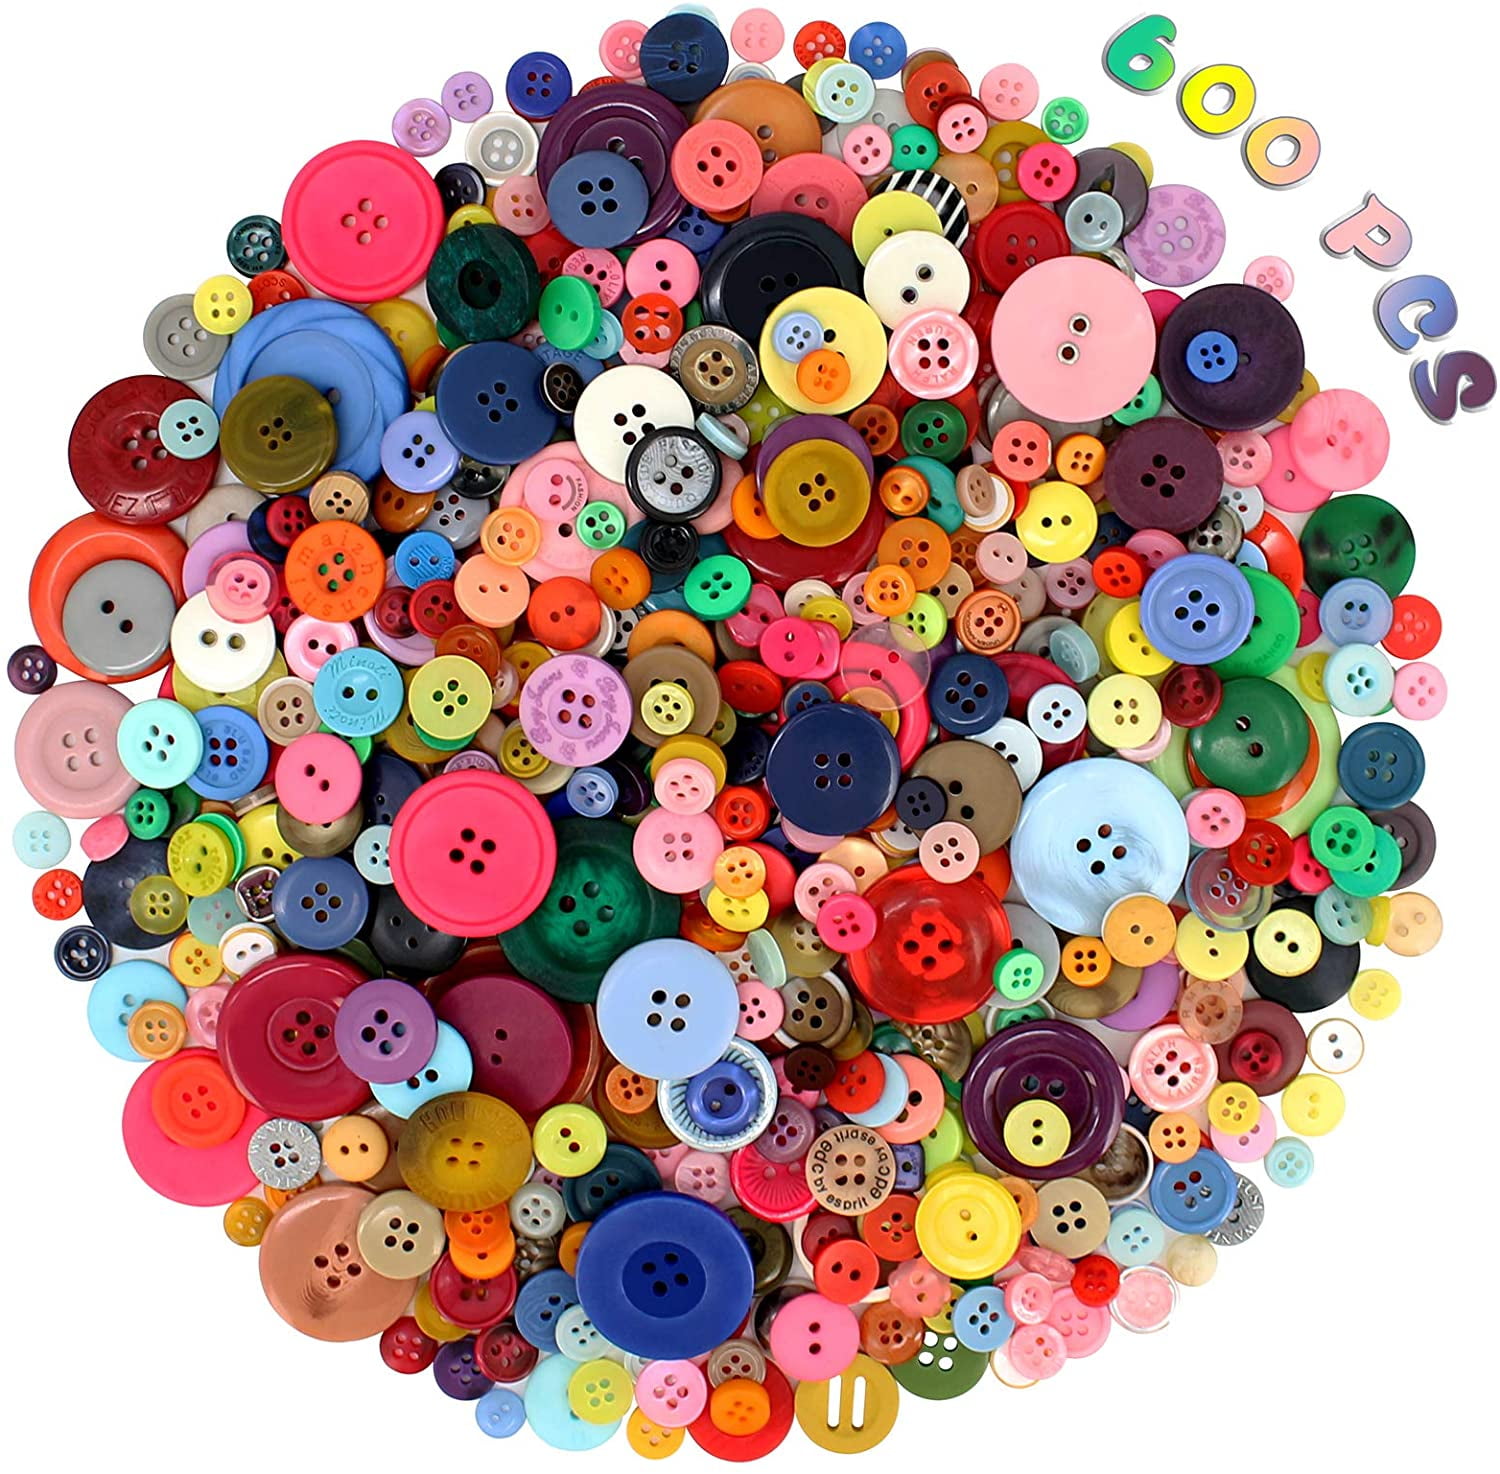 1800 Pcs Round Resin Buttons Mixed Color Assorted Sizes For Crafts Sewing  Diy Manual Button Painting Diy Handmade Ornament Buttons, 2 Holes And 4  Hole